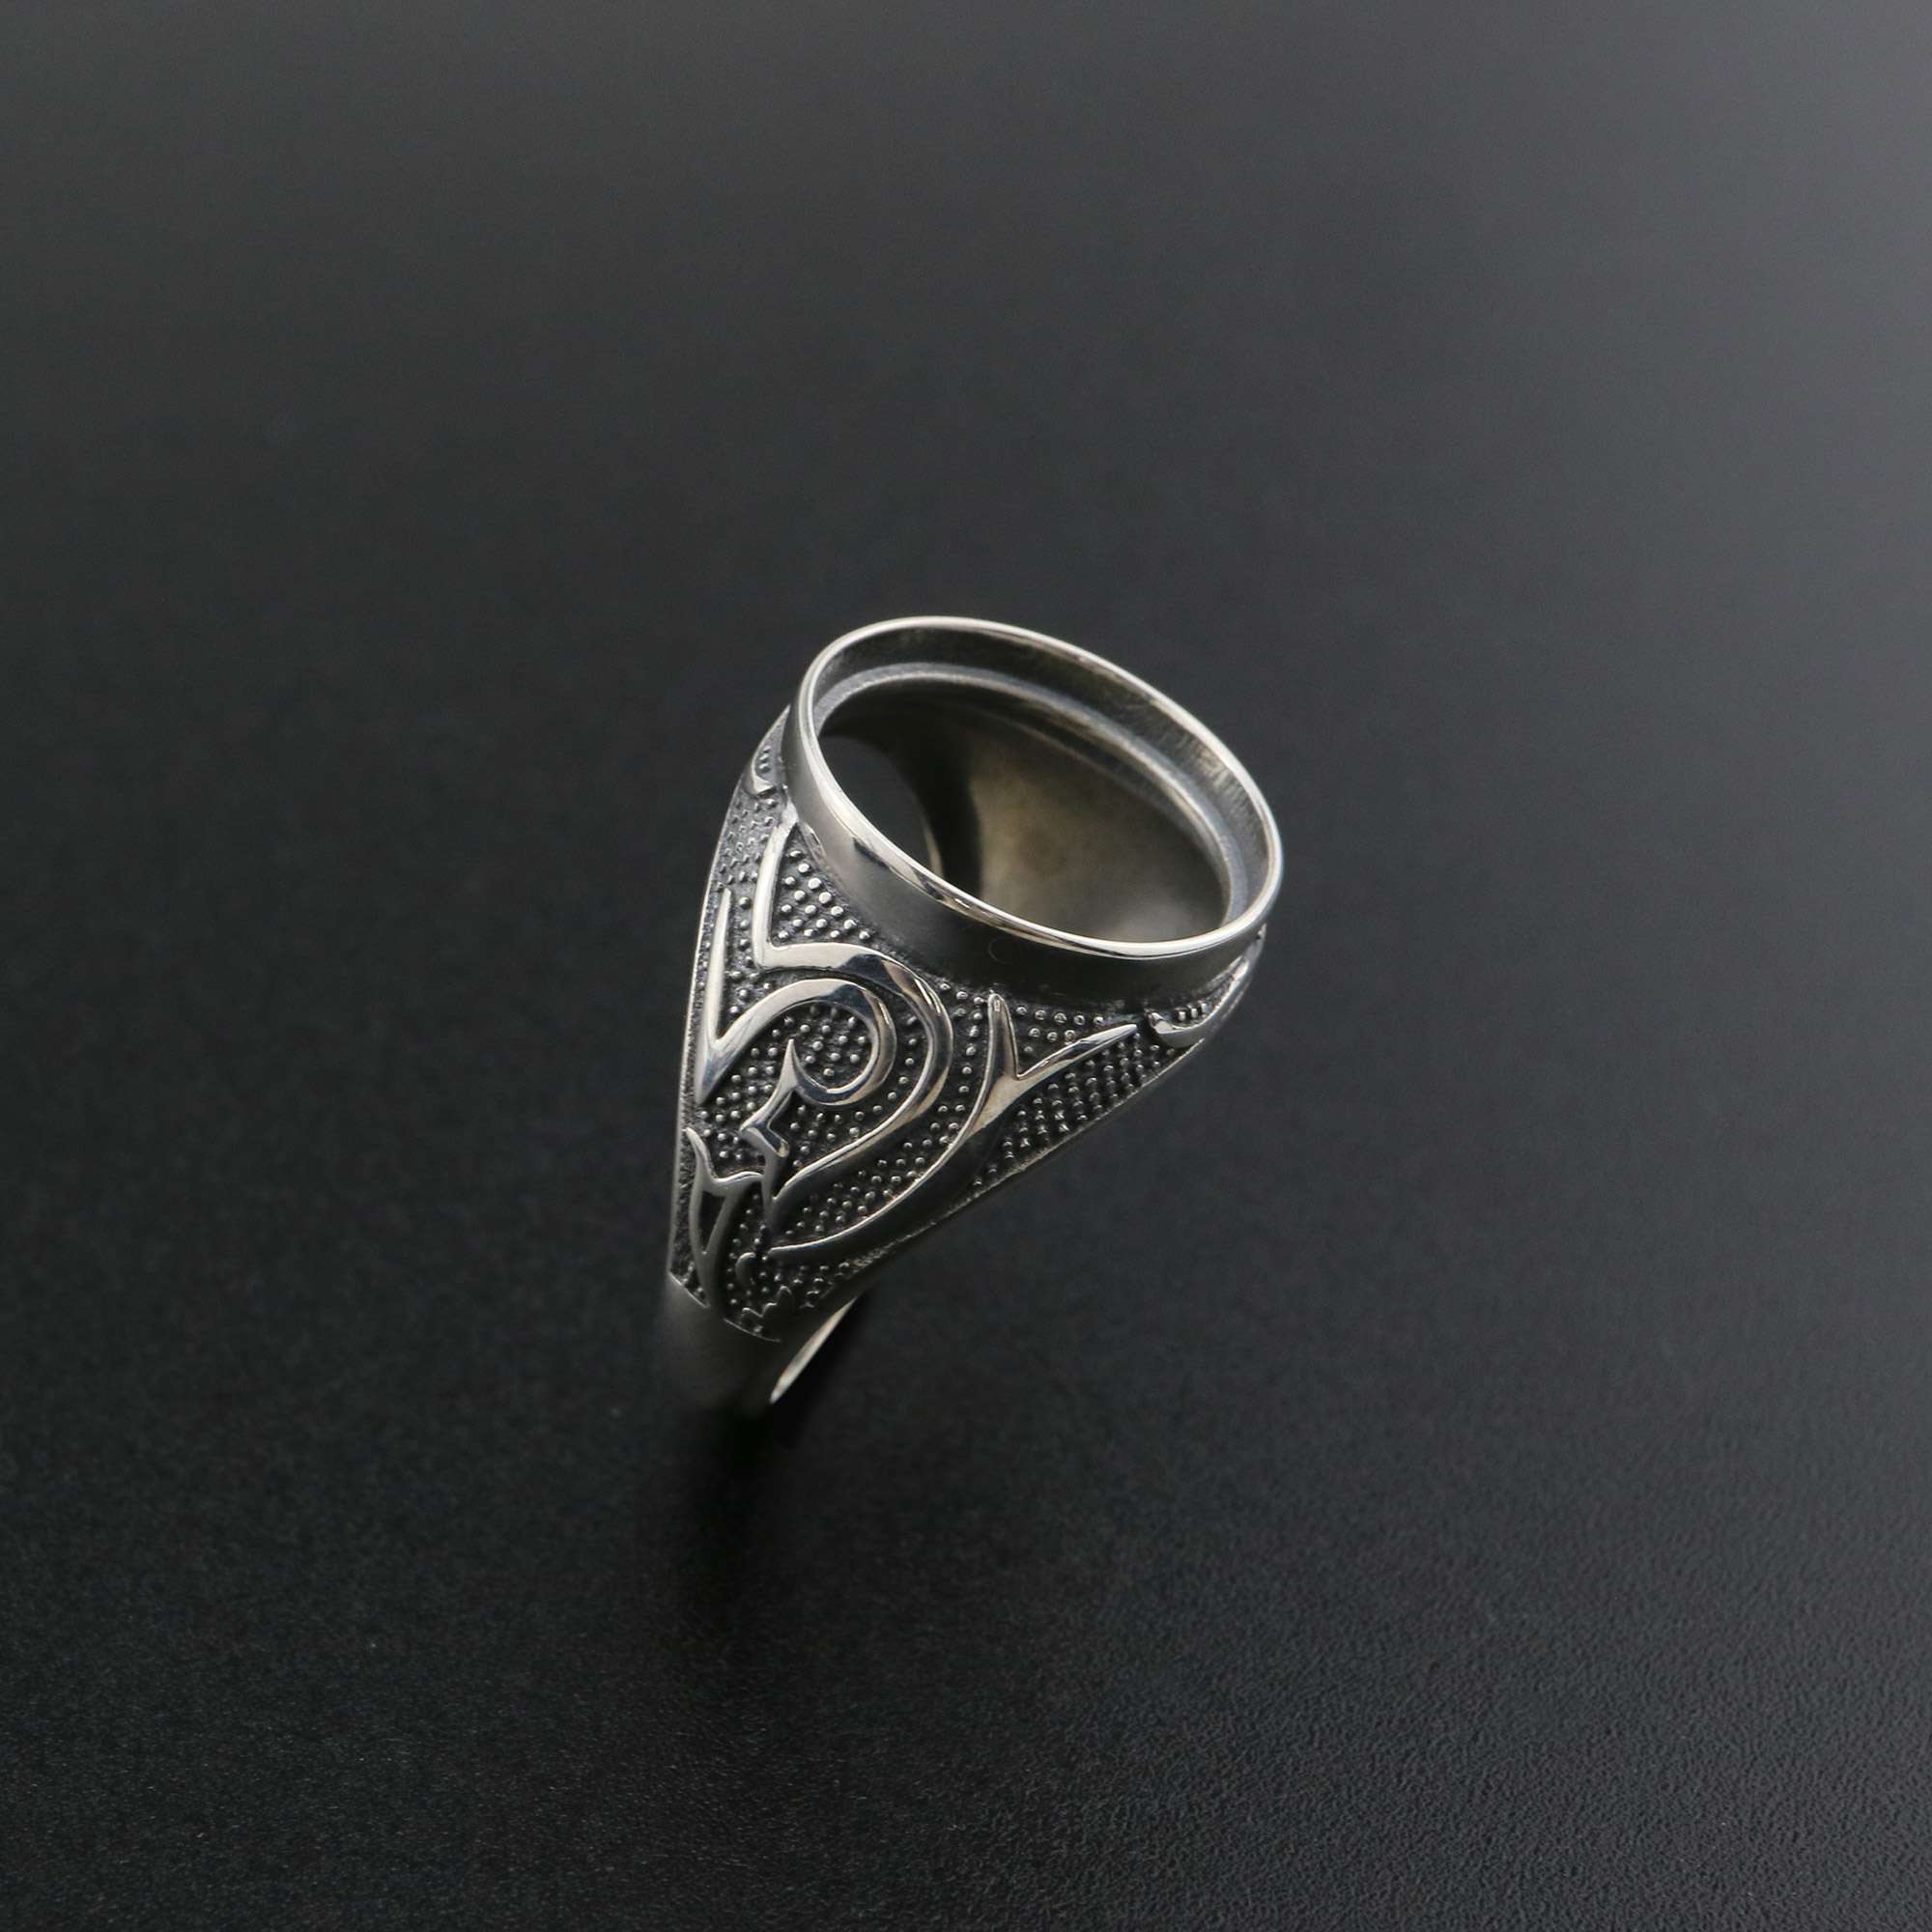 1Pcs 14MM Round Ring Settings Adjustable for Cabochon Stone Antiqued Style Solid 925 Sterling Silver DIY Bezel Tray Supplies 1213065 - Click Image to Close